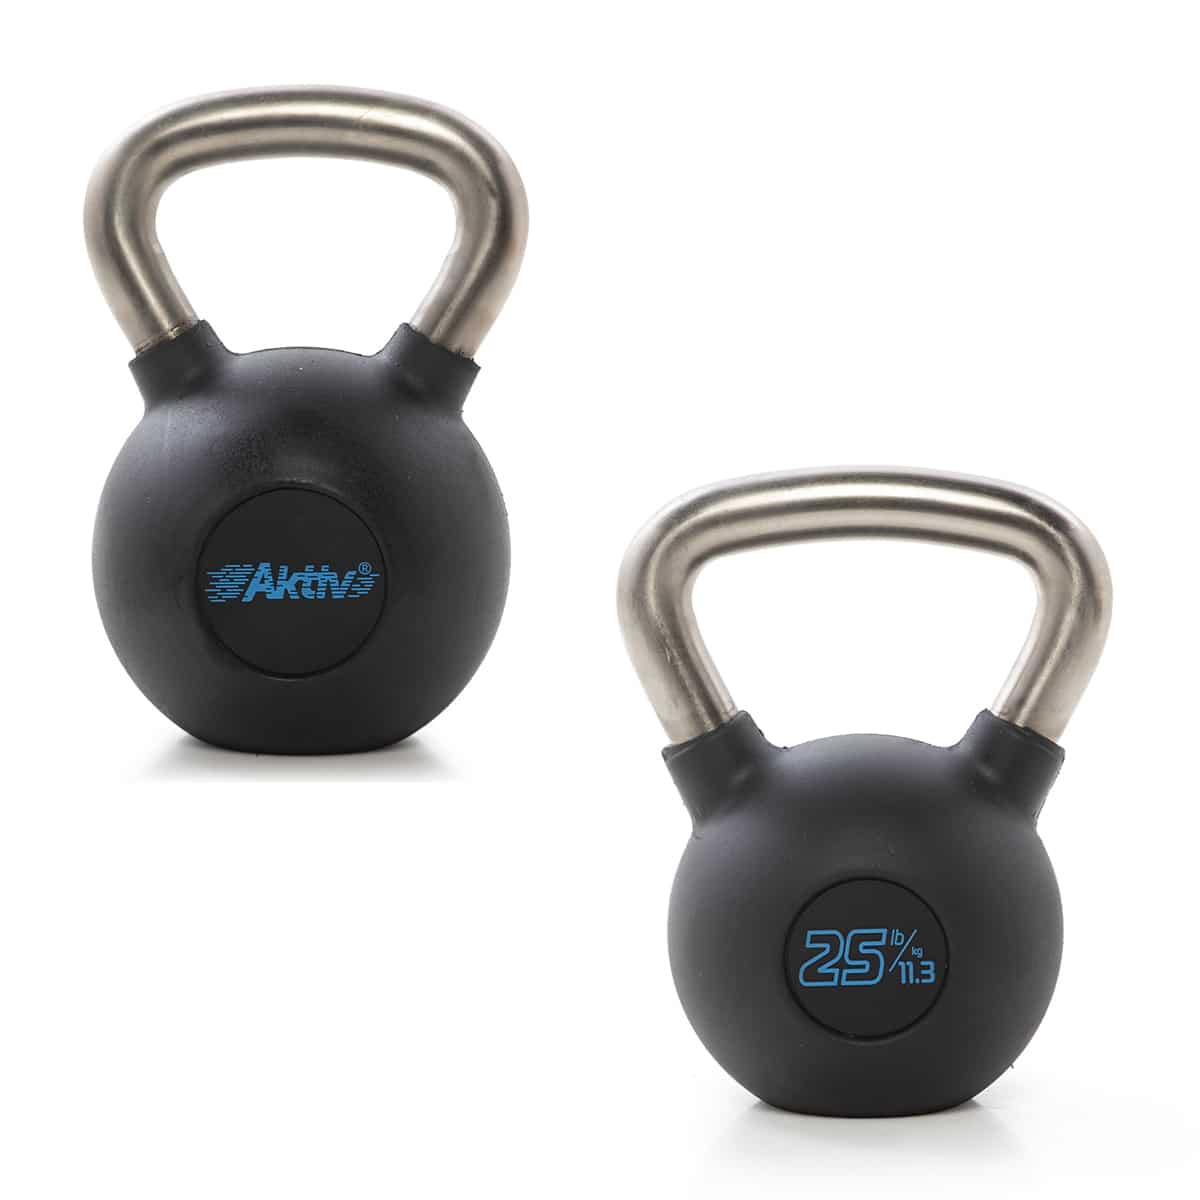 10kg Kettlebell Kettle Bell Weights Fitness Exercise Home Gym Strength Workout 